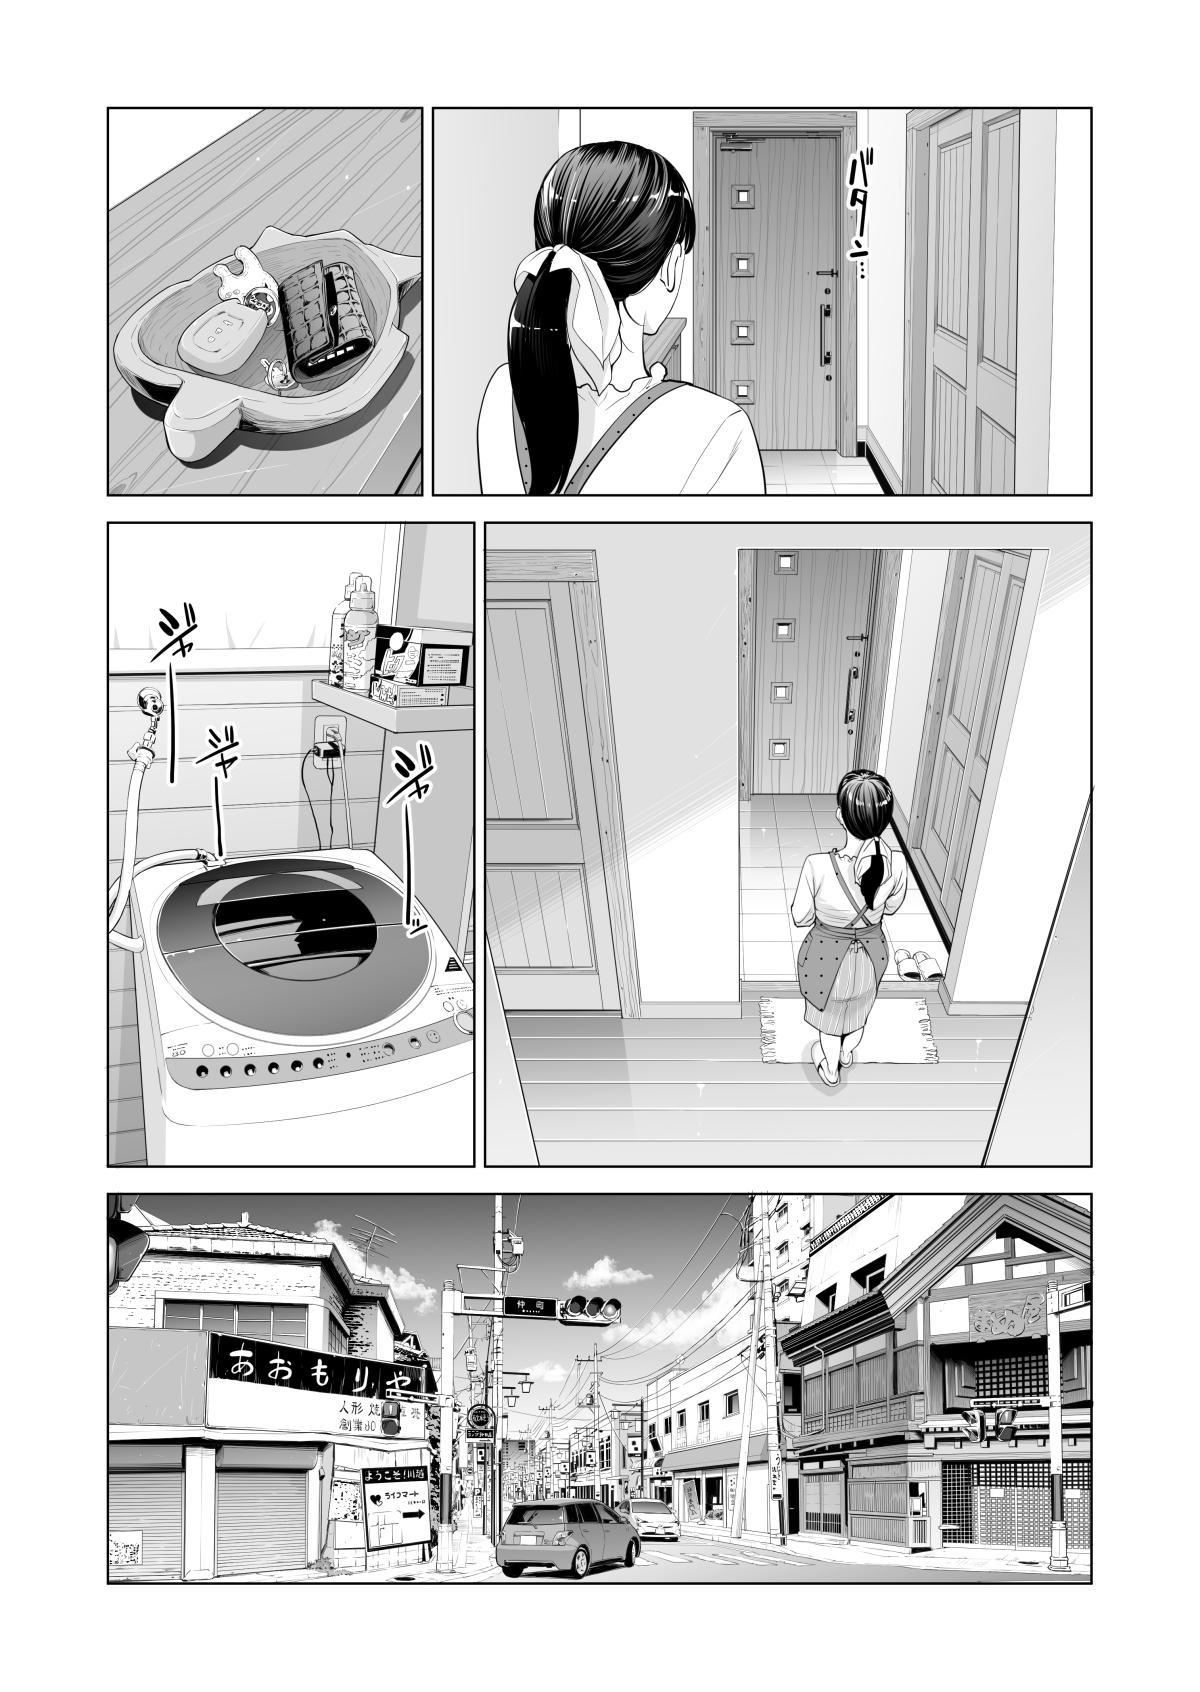 [HGT Lab (Tsusauto)] Tsukiyo no Midare Zake (Zenpen) Moonlit Intoxication ~ A Housewife Stolen by a Coworker Besides her Blackout Drunk Husband ~ Chapter 1 [English] 7